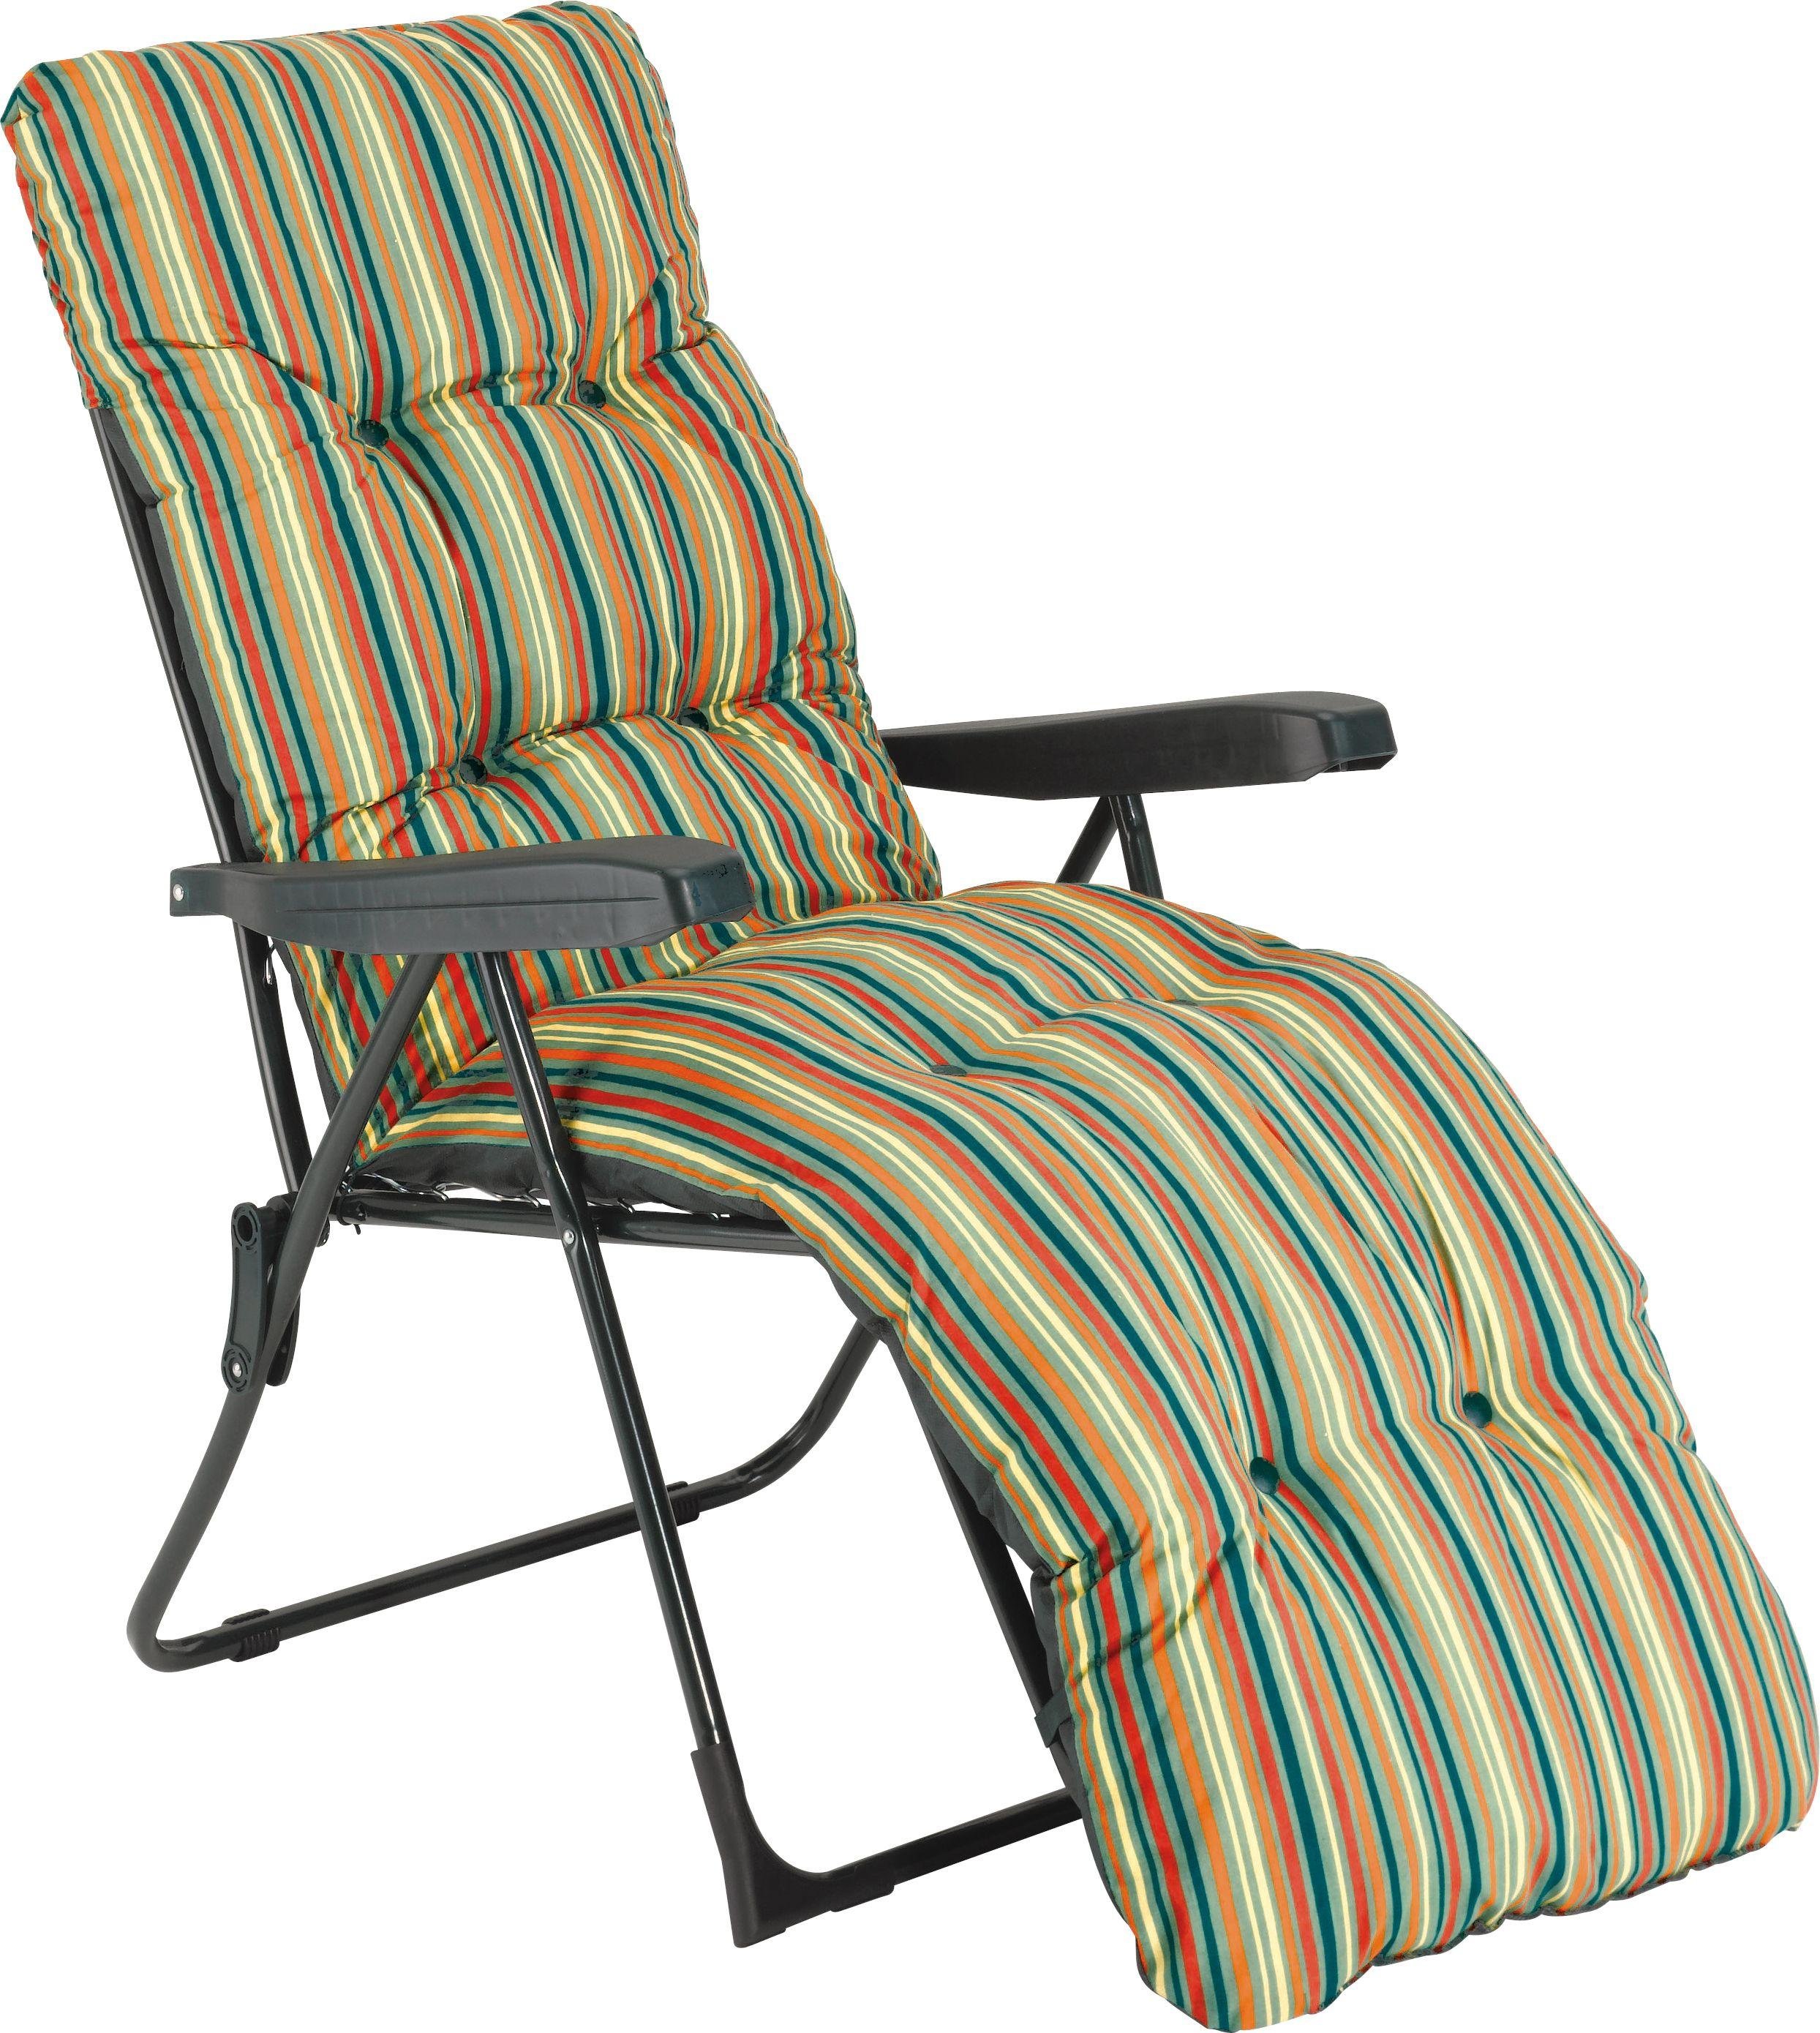 New Sun Recliner Chairs Argos for Simple Design